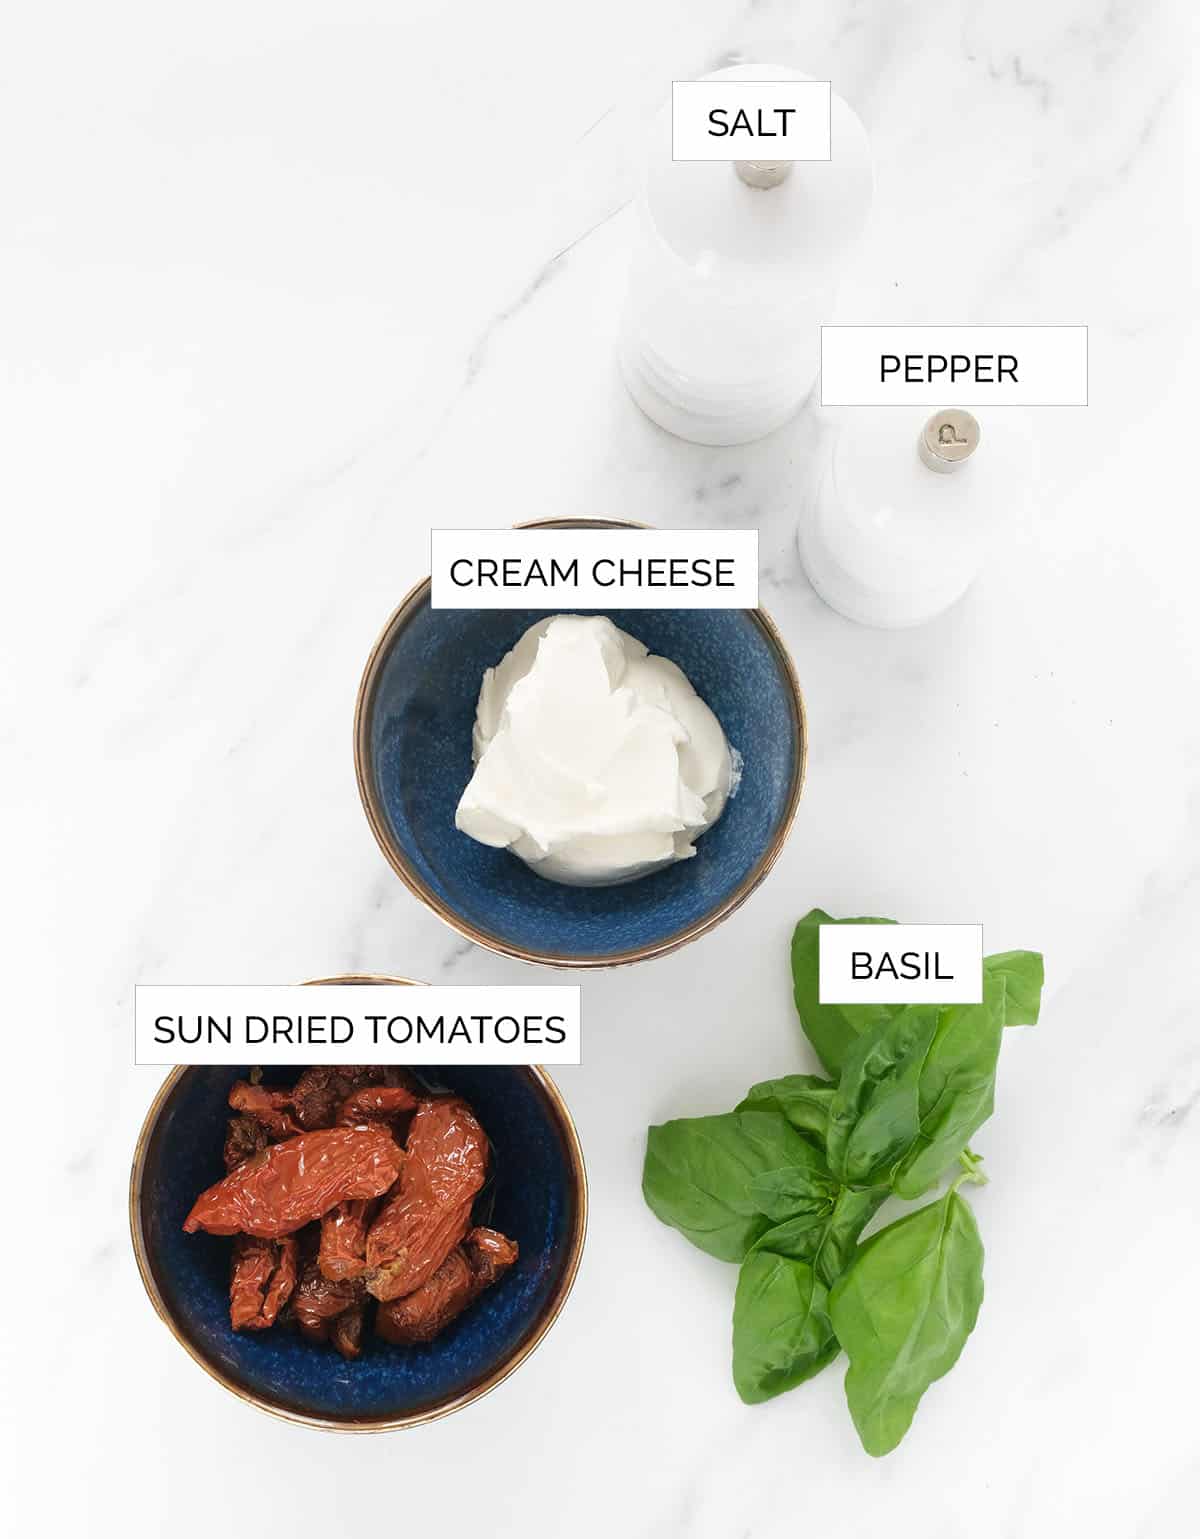 The ingredients to make this sun dried tomato cream cheese are arrange over a white background.